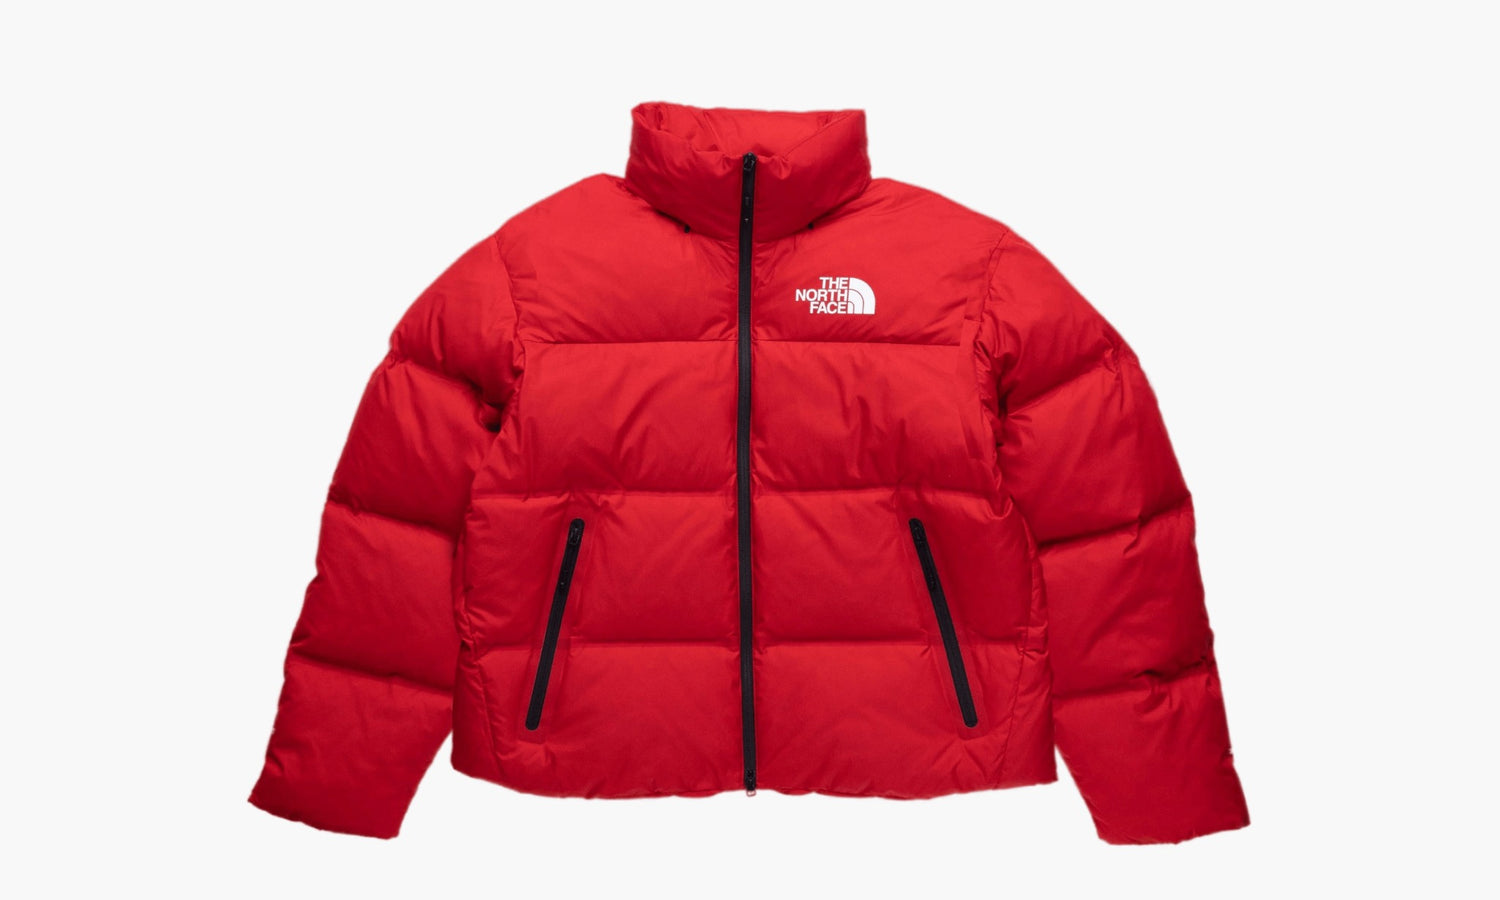 The North Face RMST Nuptse Jacket “Red” - NF0A7UQZ-682 | Grailshop